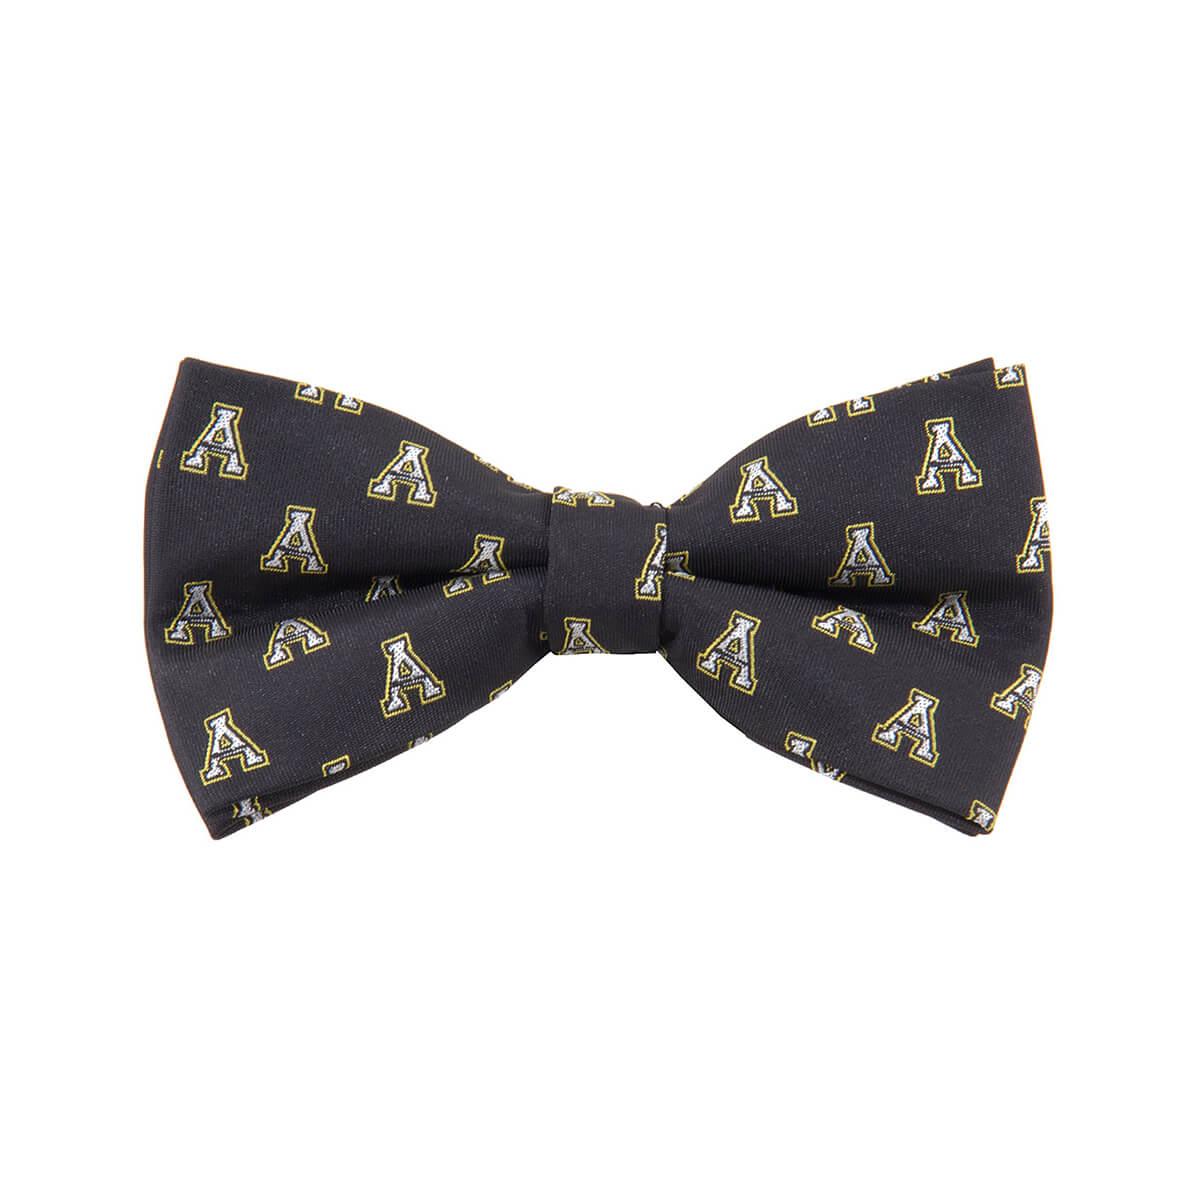  Appalachian State Mountaineers Repeat Bow Tie